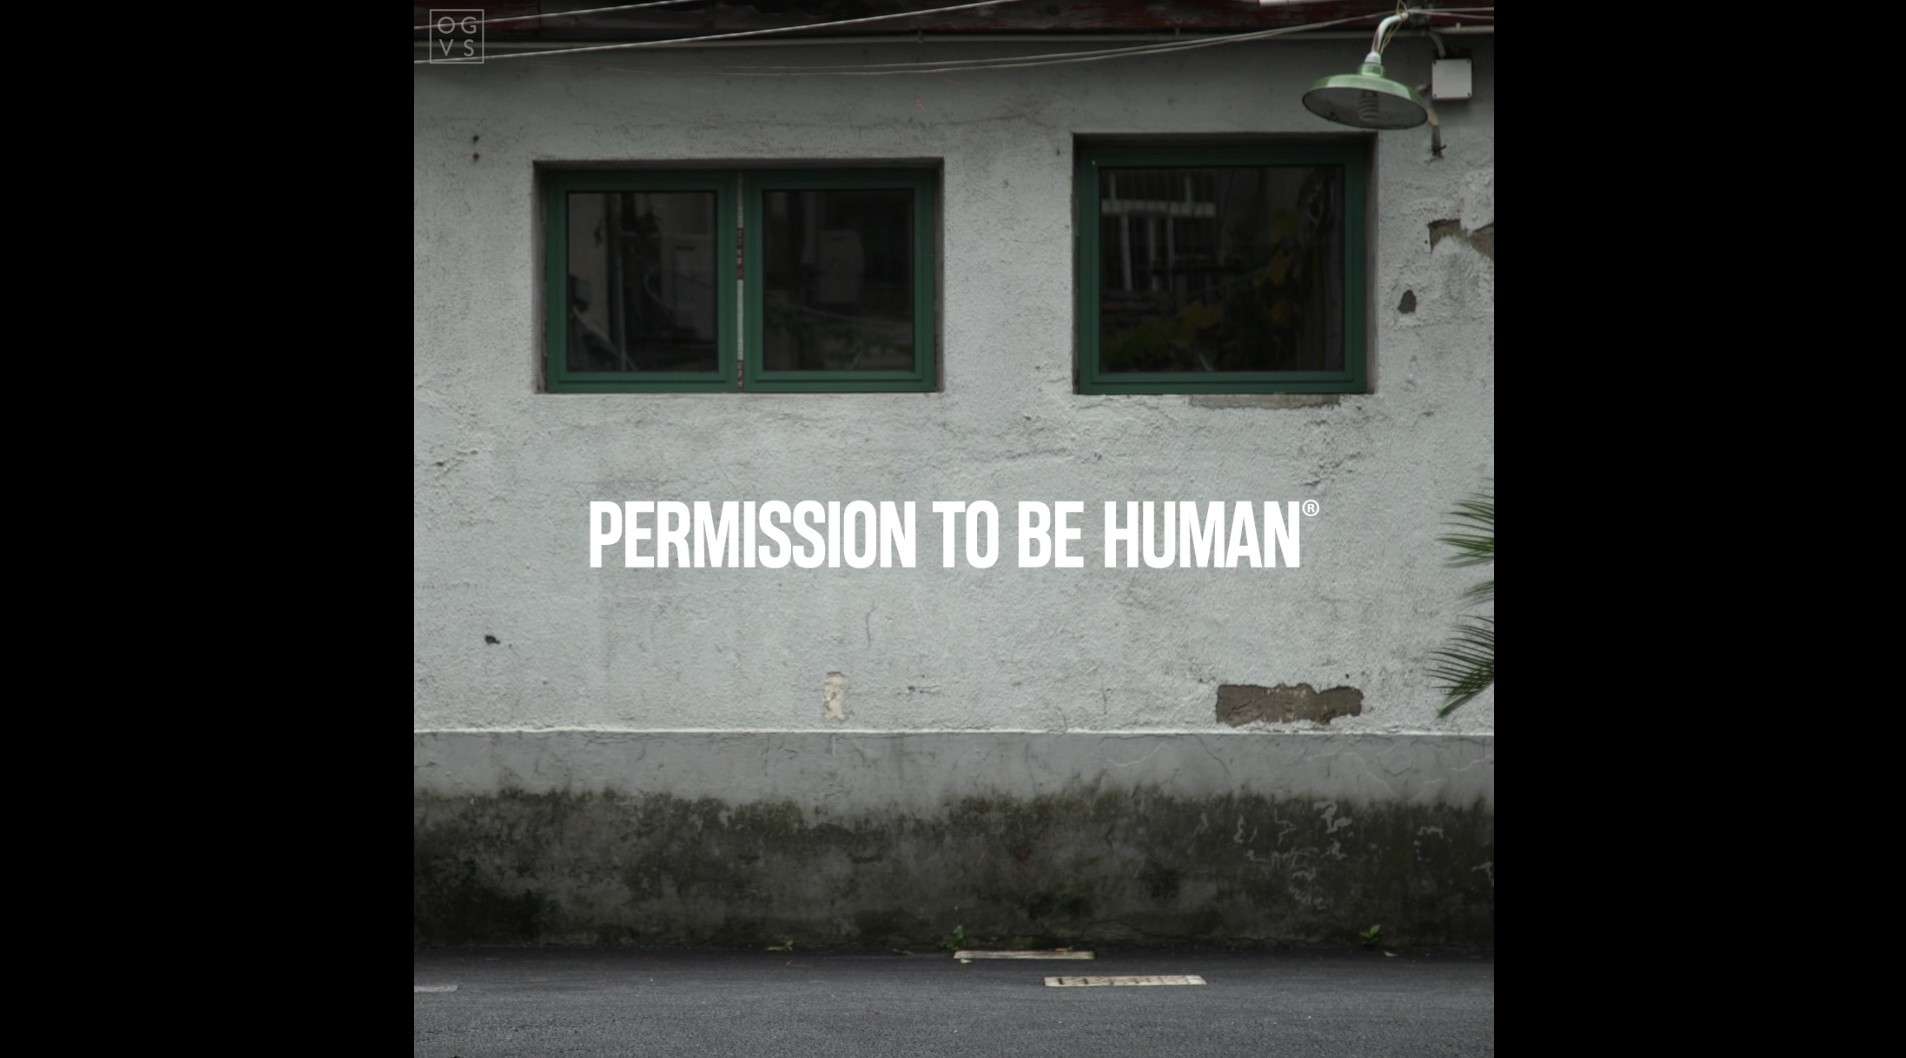 PERMISSION TO BE HUMAN